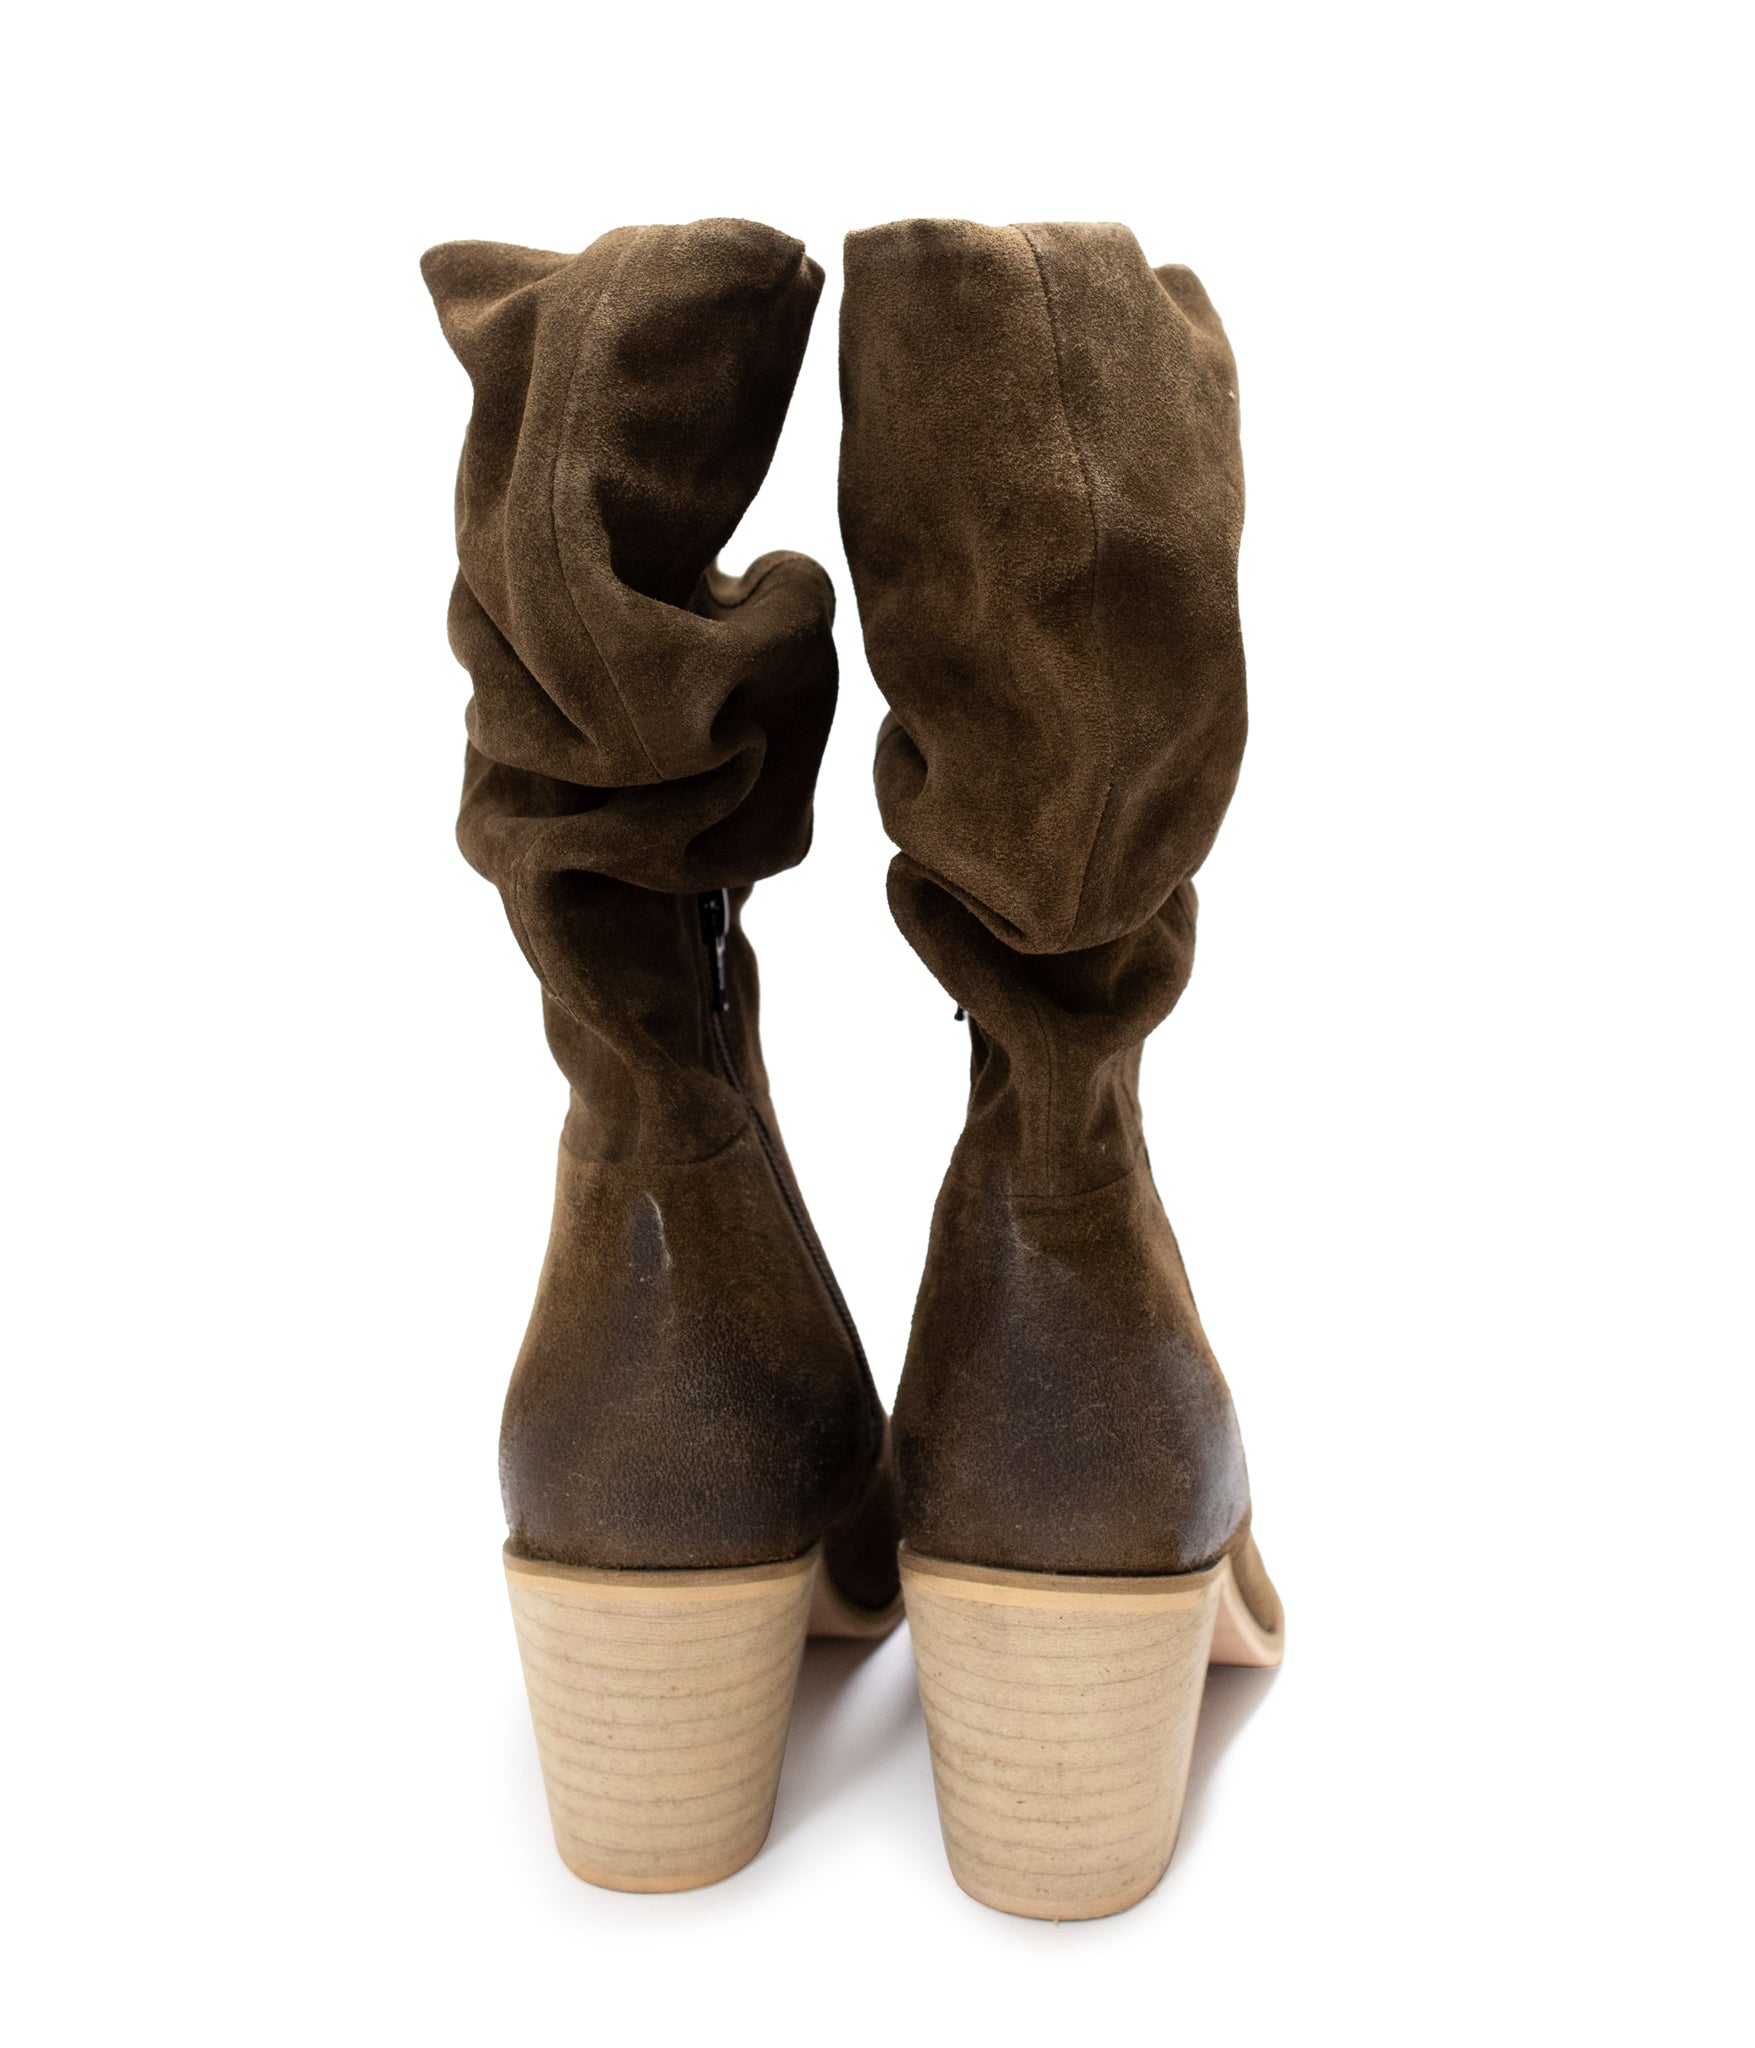 Darla Slouch Boot in Brown